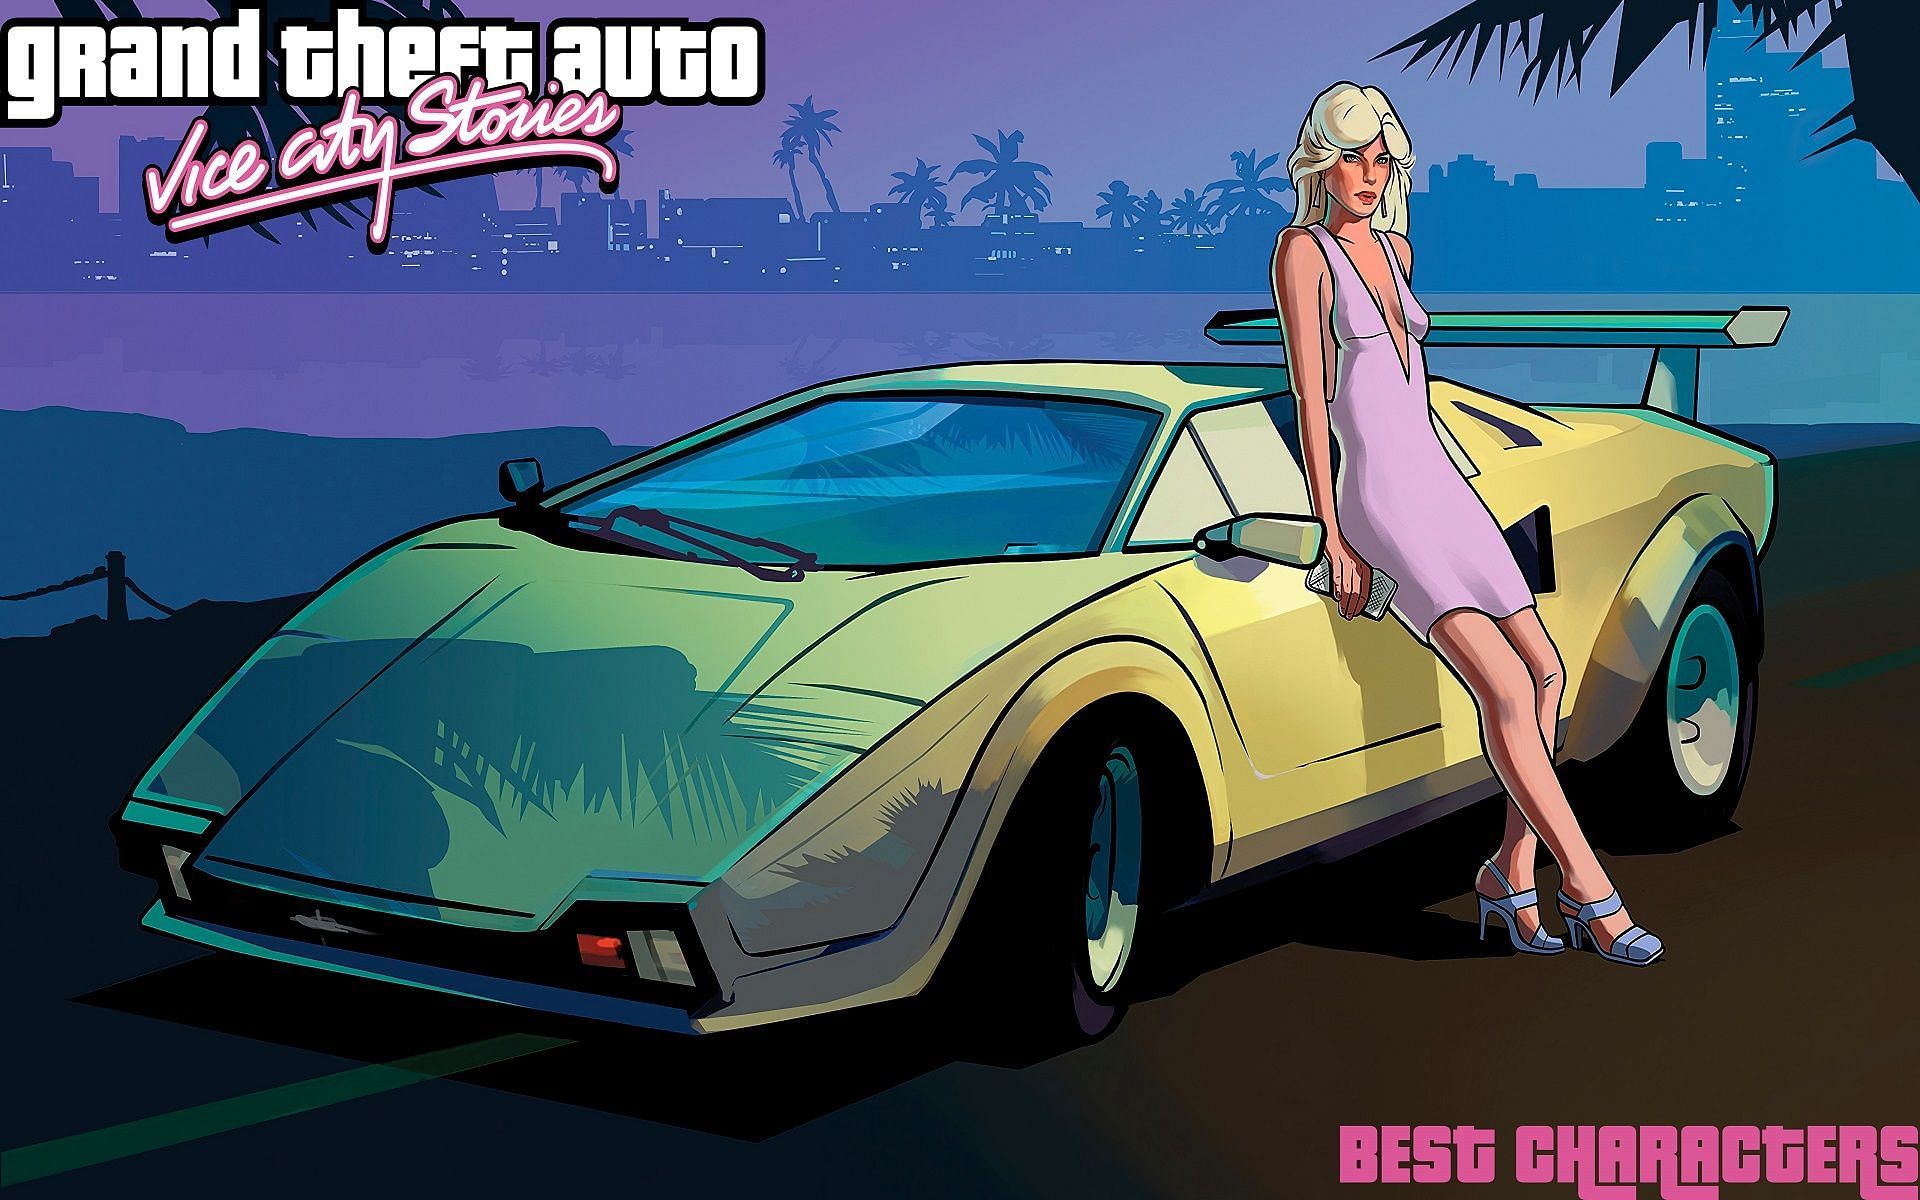 Top 5 Characters In Gta Vice City Stories Ranked 0460